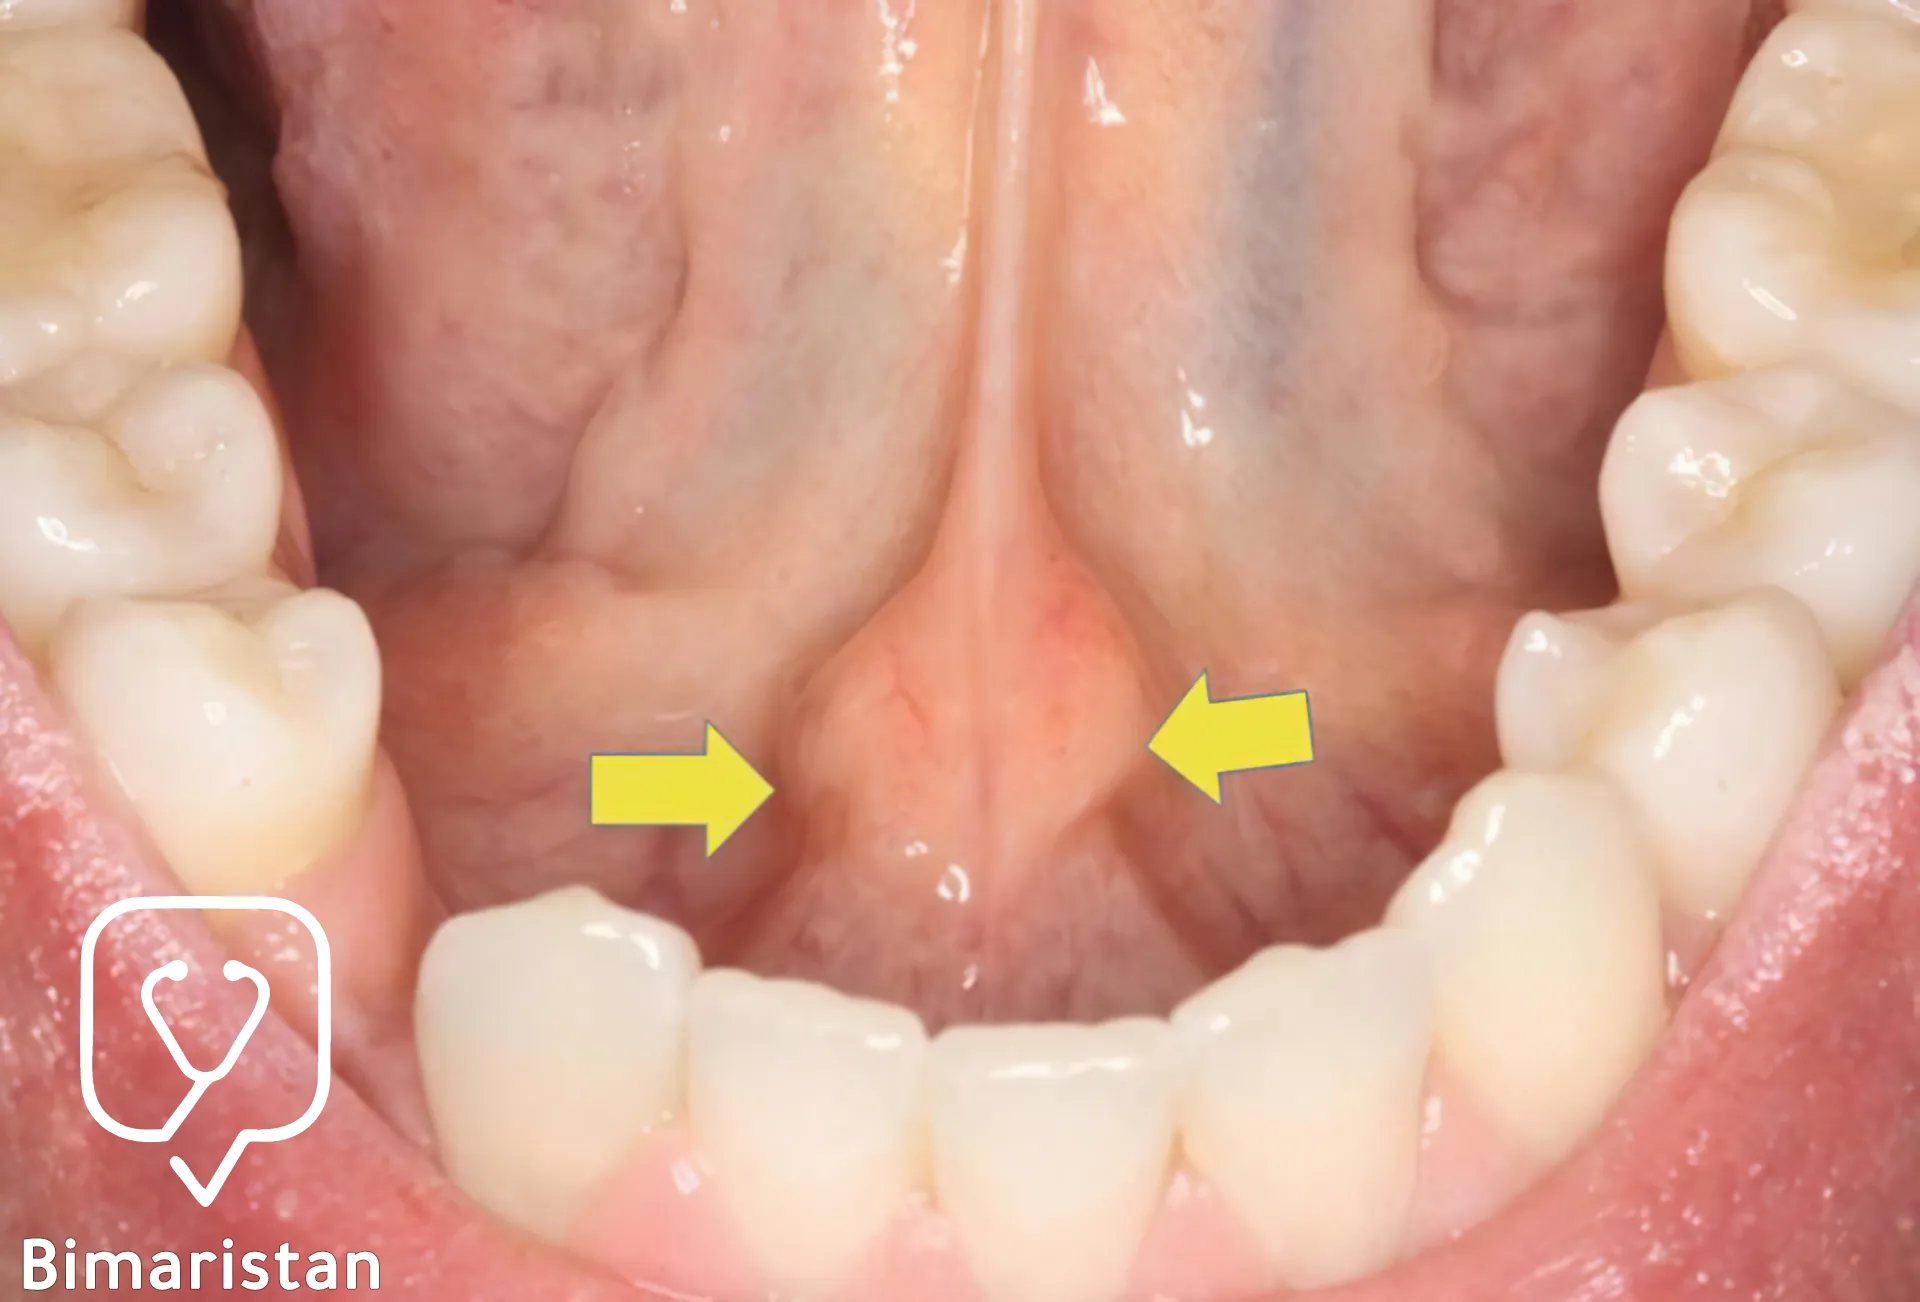 The swelling indicated by the arrow indicates the presence of a stone in the floor of the mouth